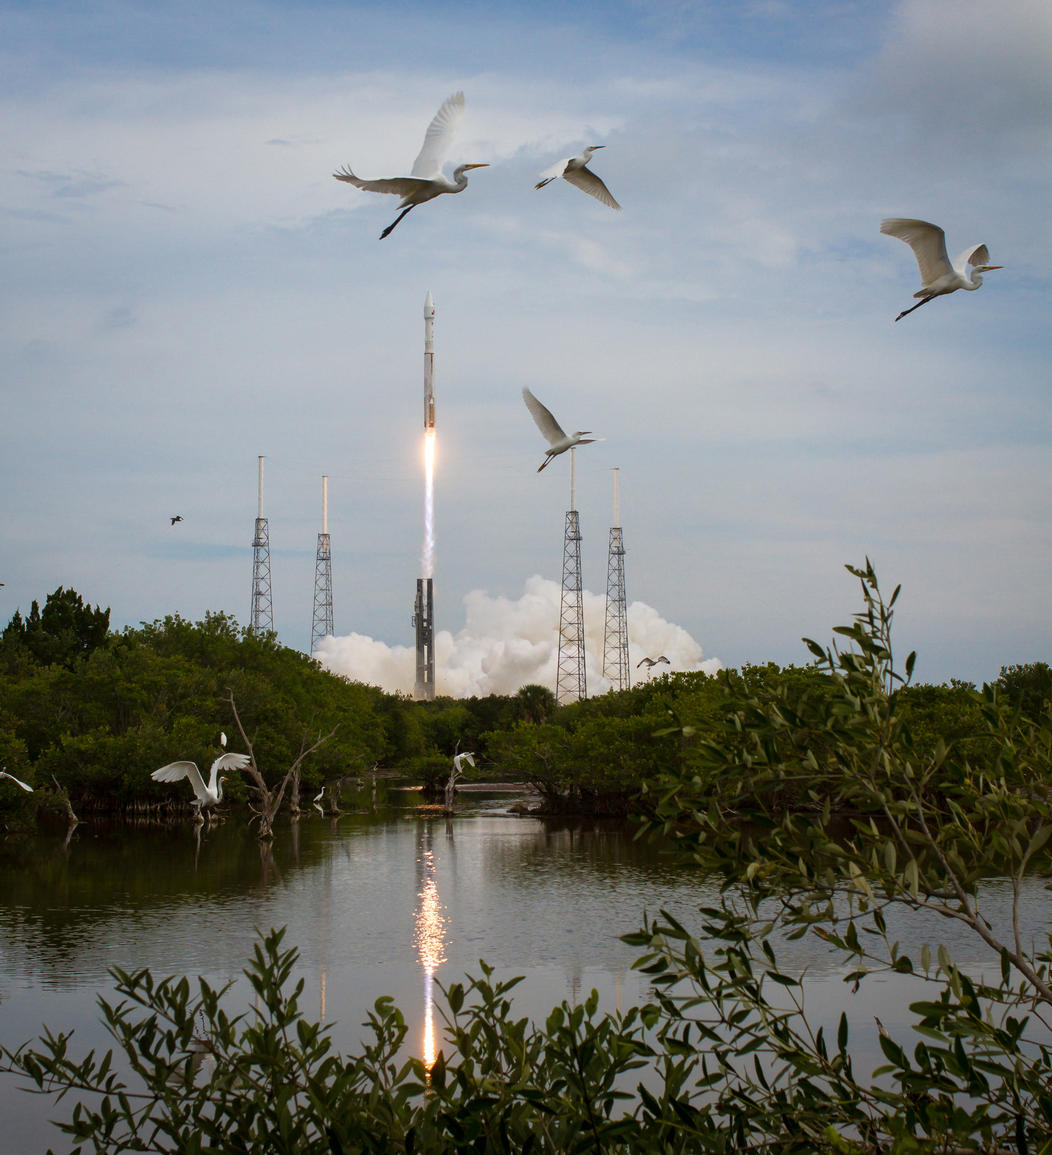 Taking Flight at Cape Canaveral